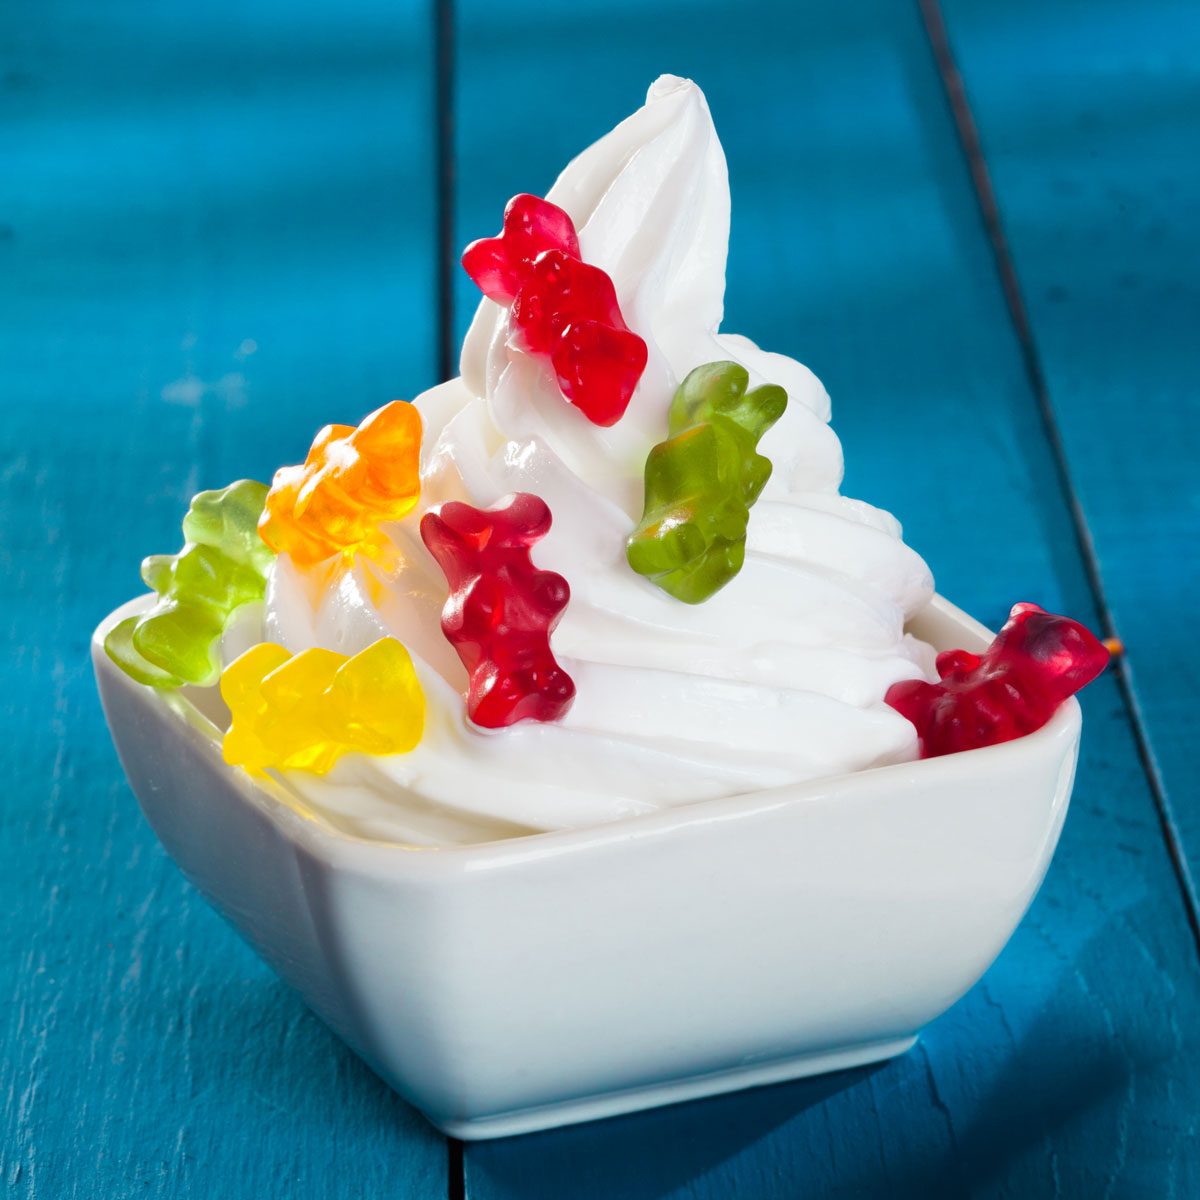 A Bowl Of Ice Cream With Gummi Bears As Topping On A Wooden Blue Background